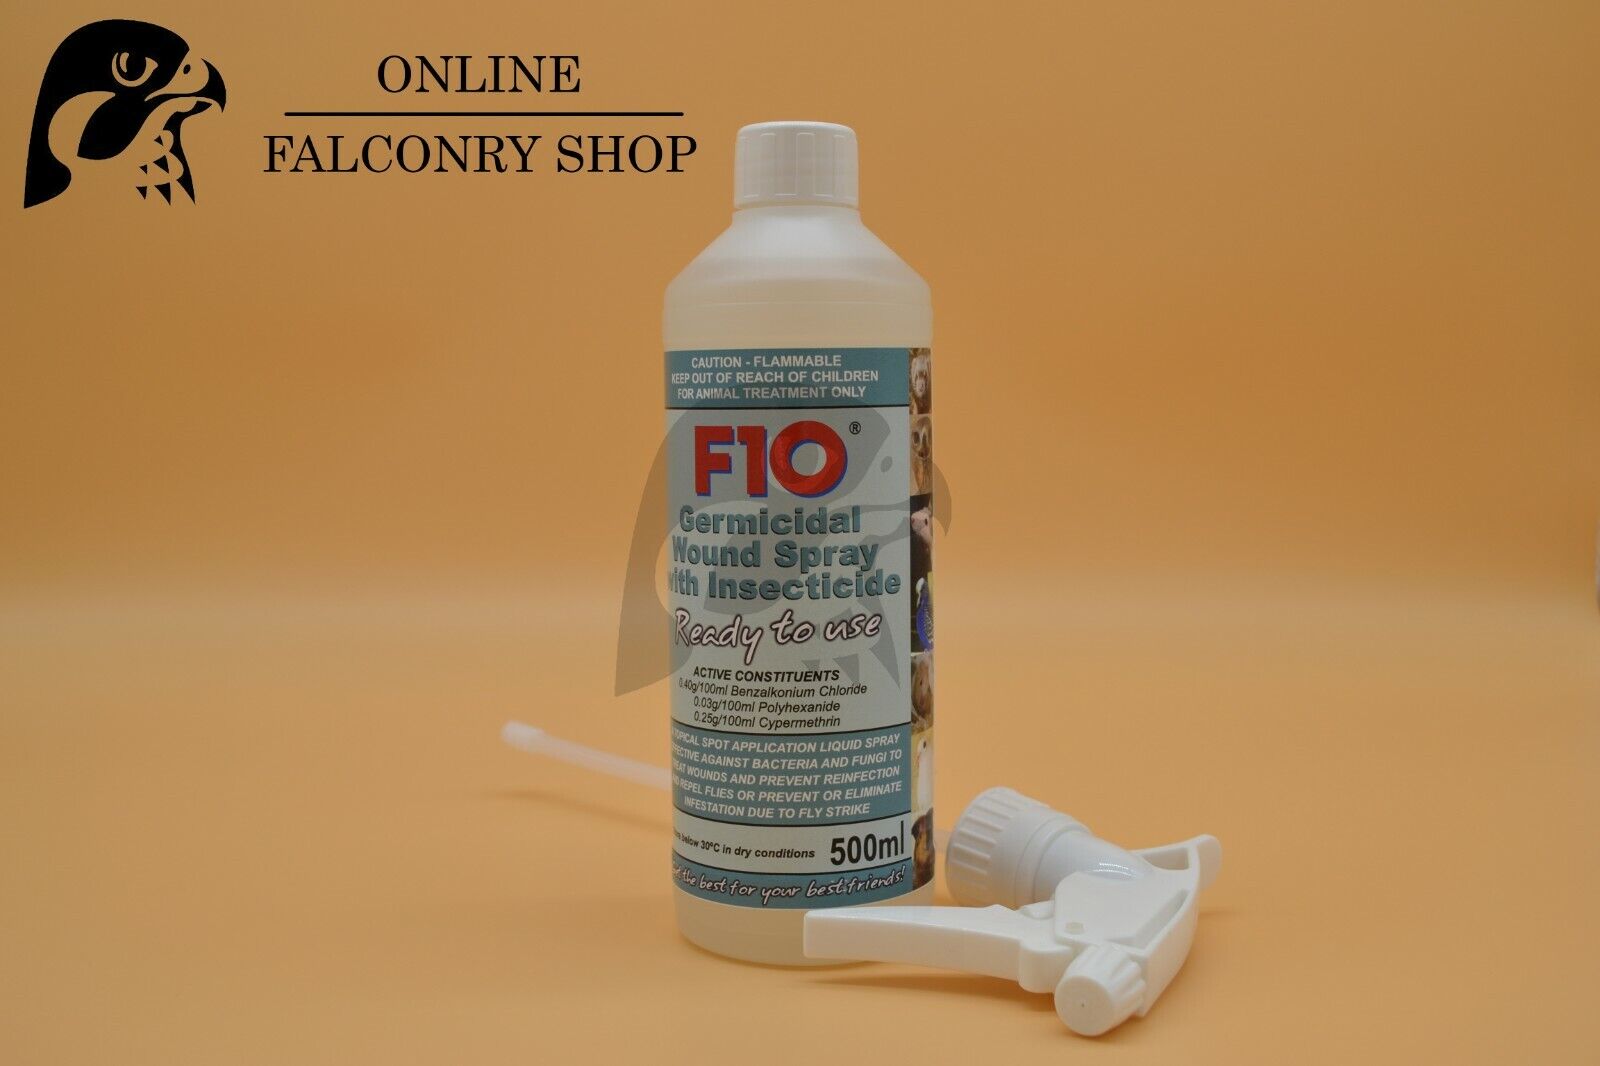 OFS F10 Wound Spray with Insecticide 500ml